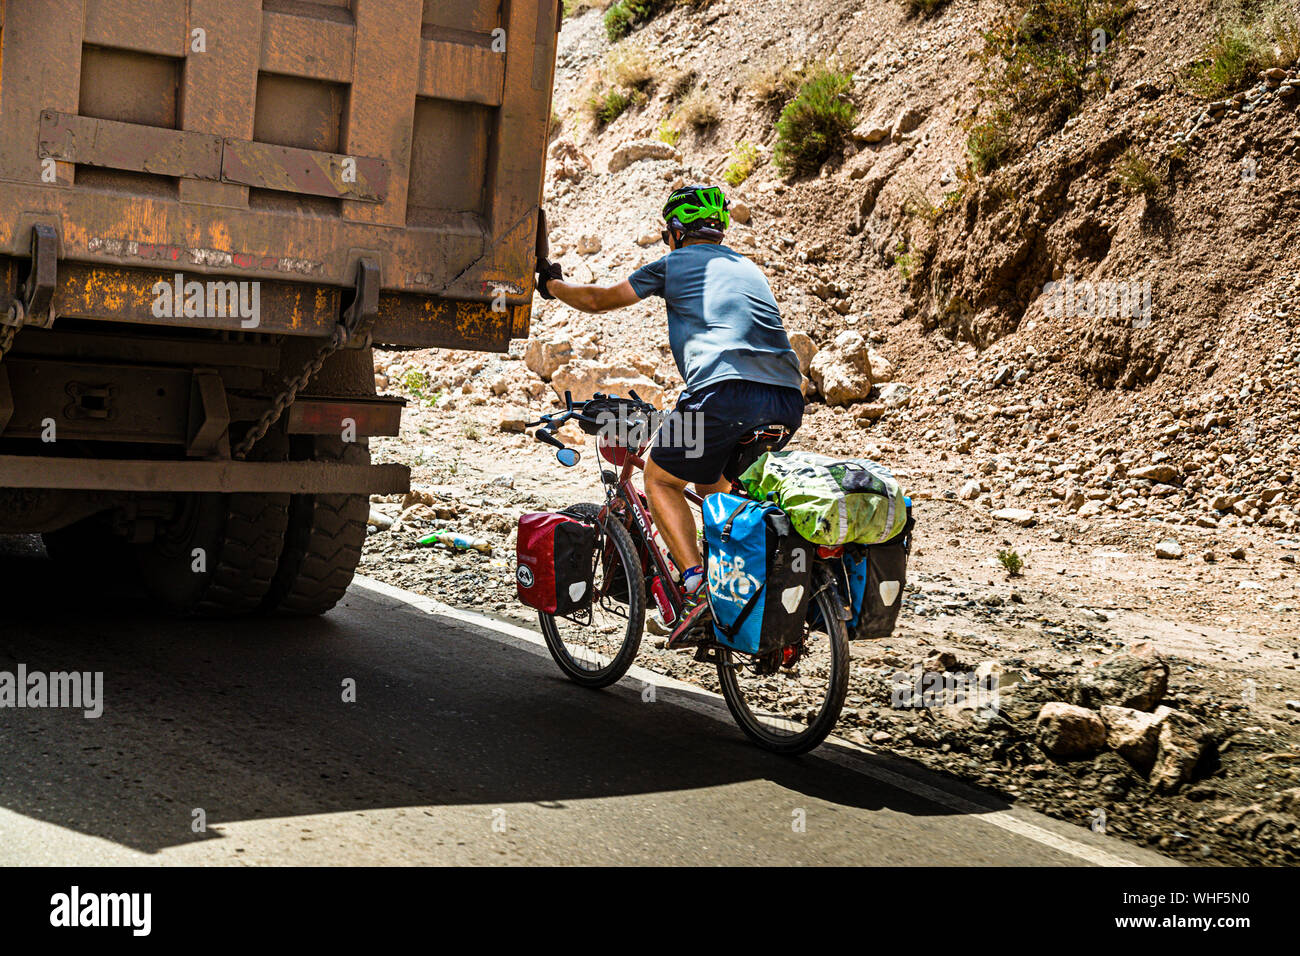 Cyclist being pulled by Van up a Mountain Pass near Takfon, Tajikistan. A bicycle tourist is pulled up the Takfon Pass by a truck in Tajikistan. In the tow of a transporter, several hundred meters of altitude can easily be overcome on a bicycle Stock Photo